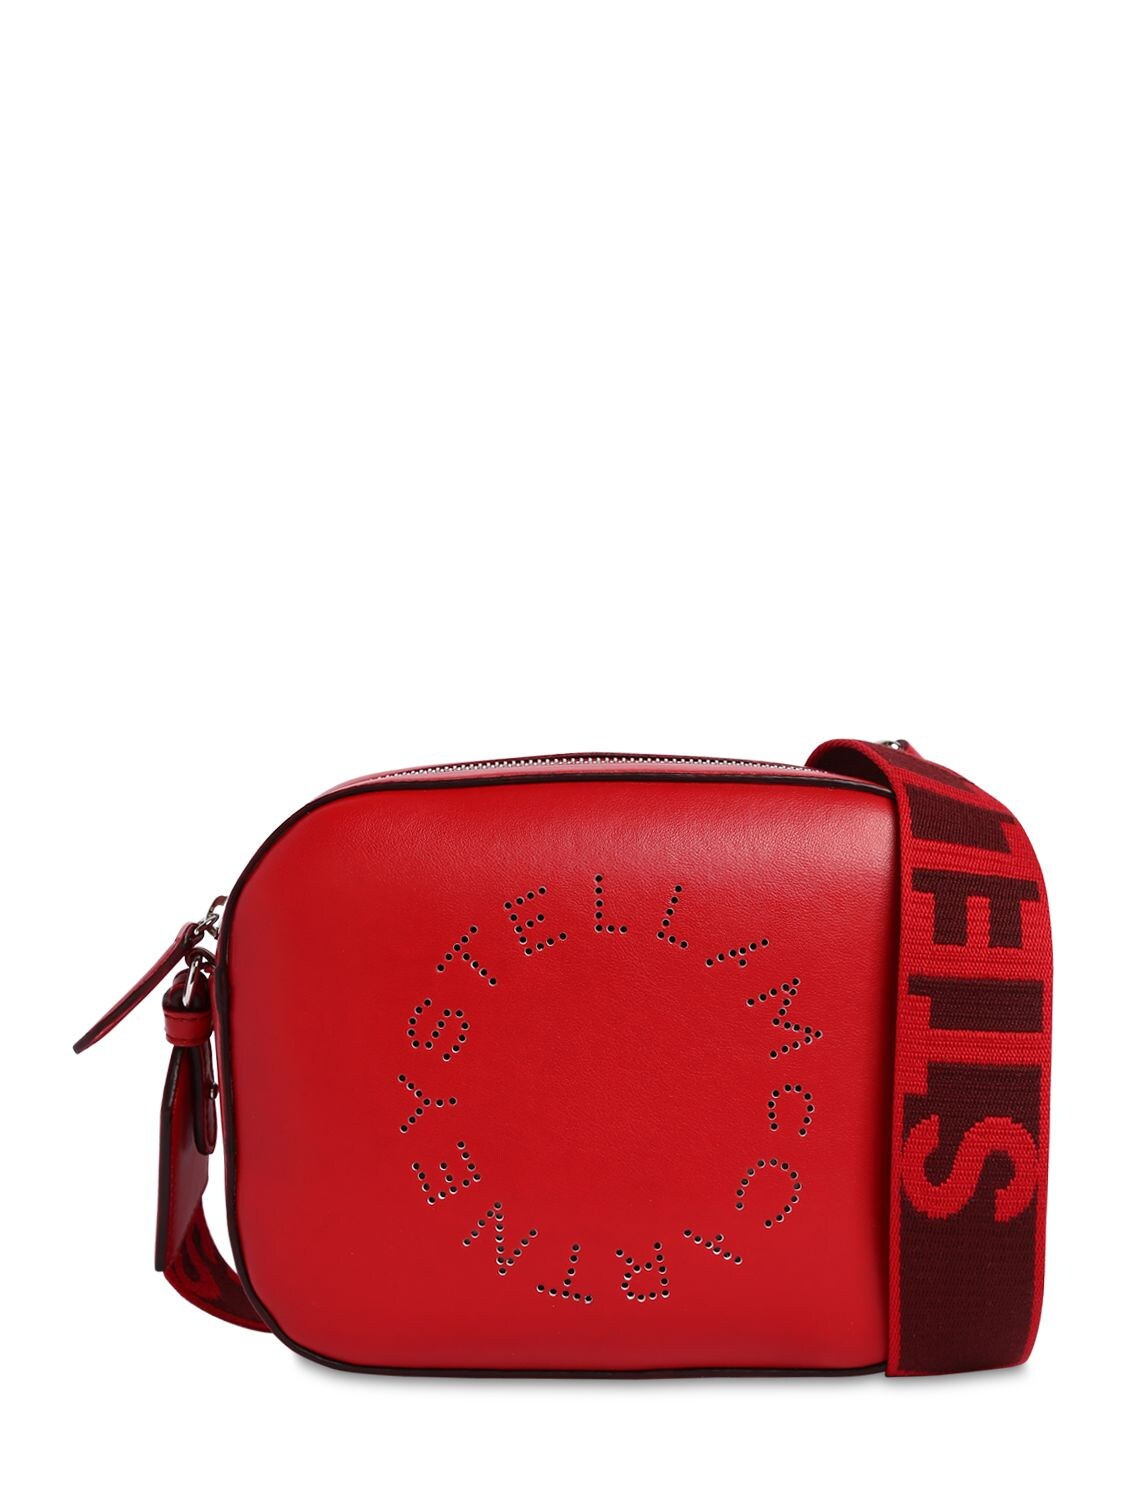 Stella Mccartney Eco Soft Laser Perforated Camera Bag In Red